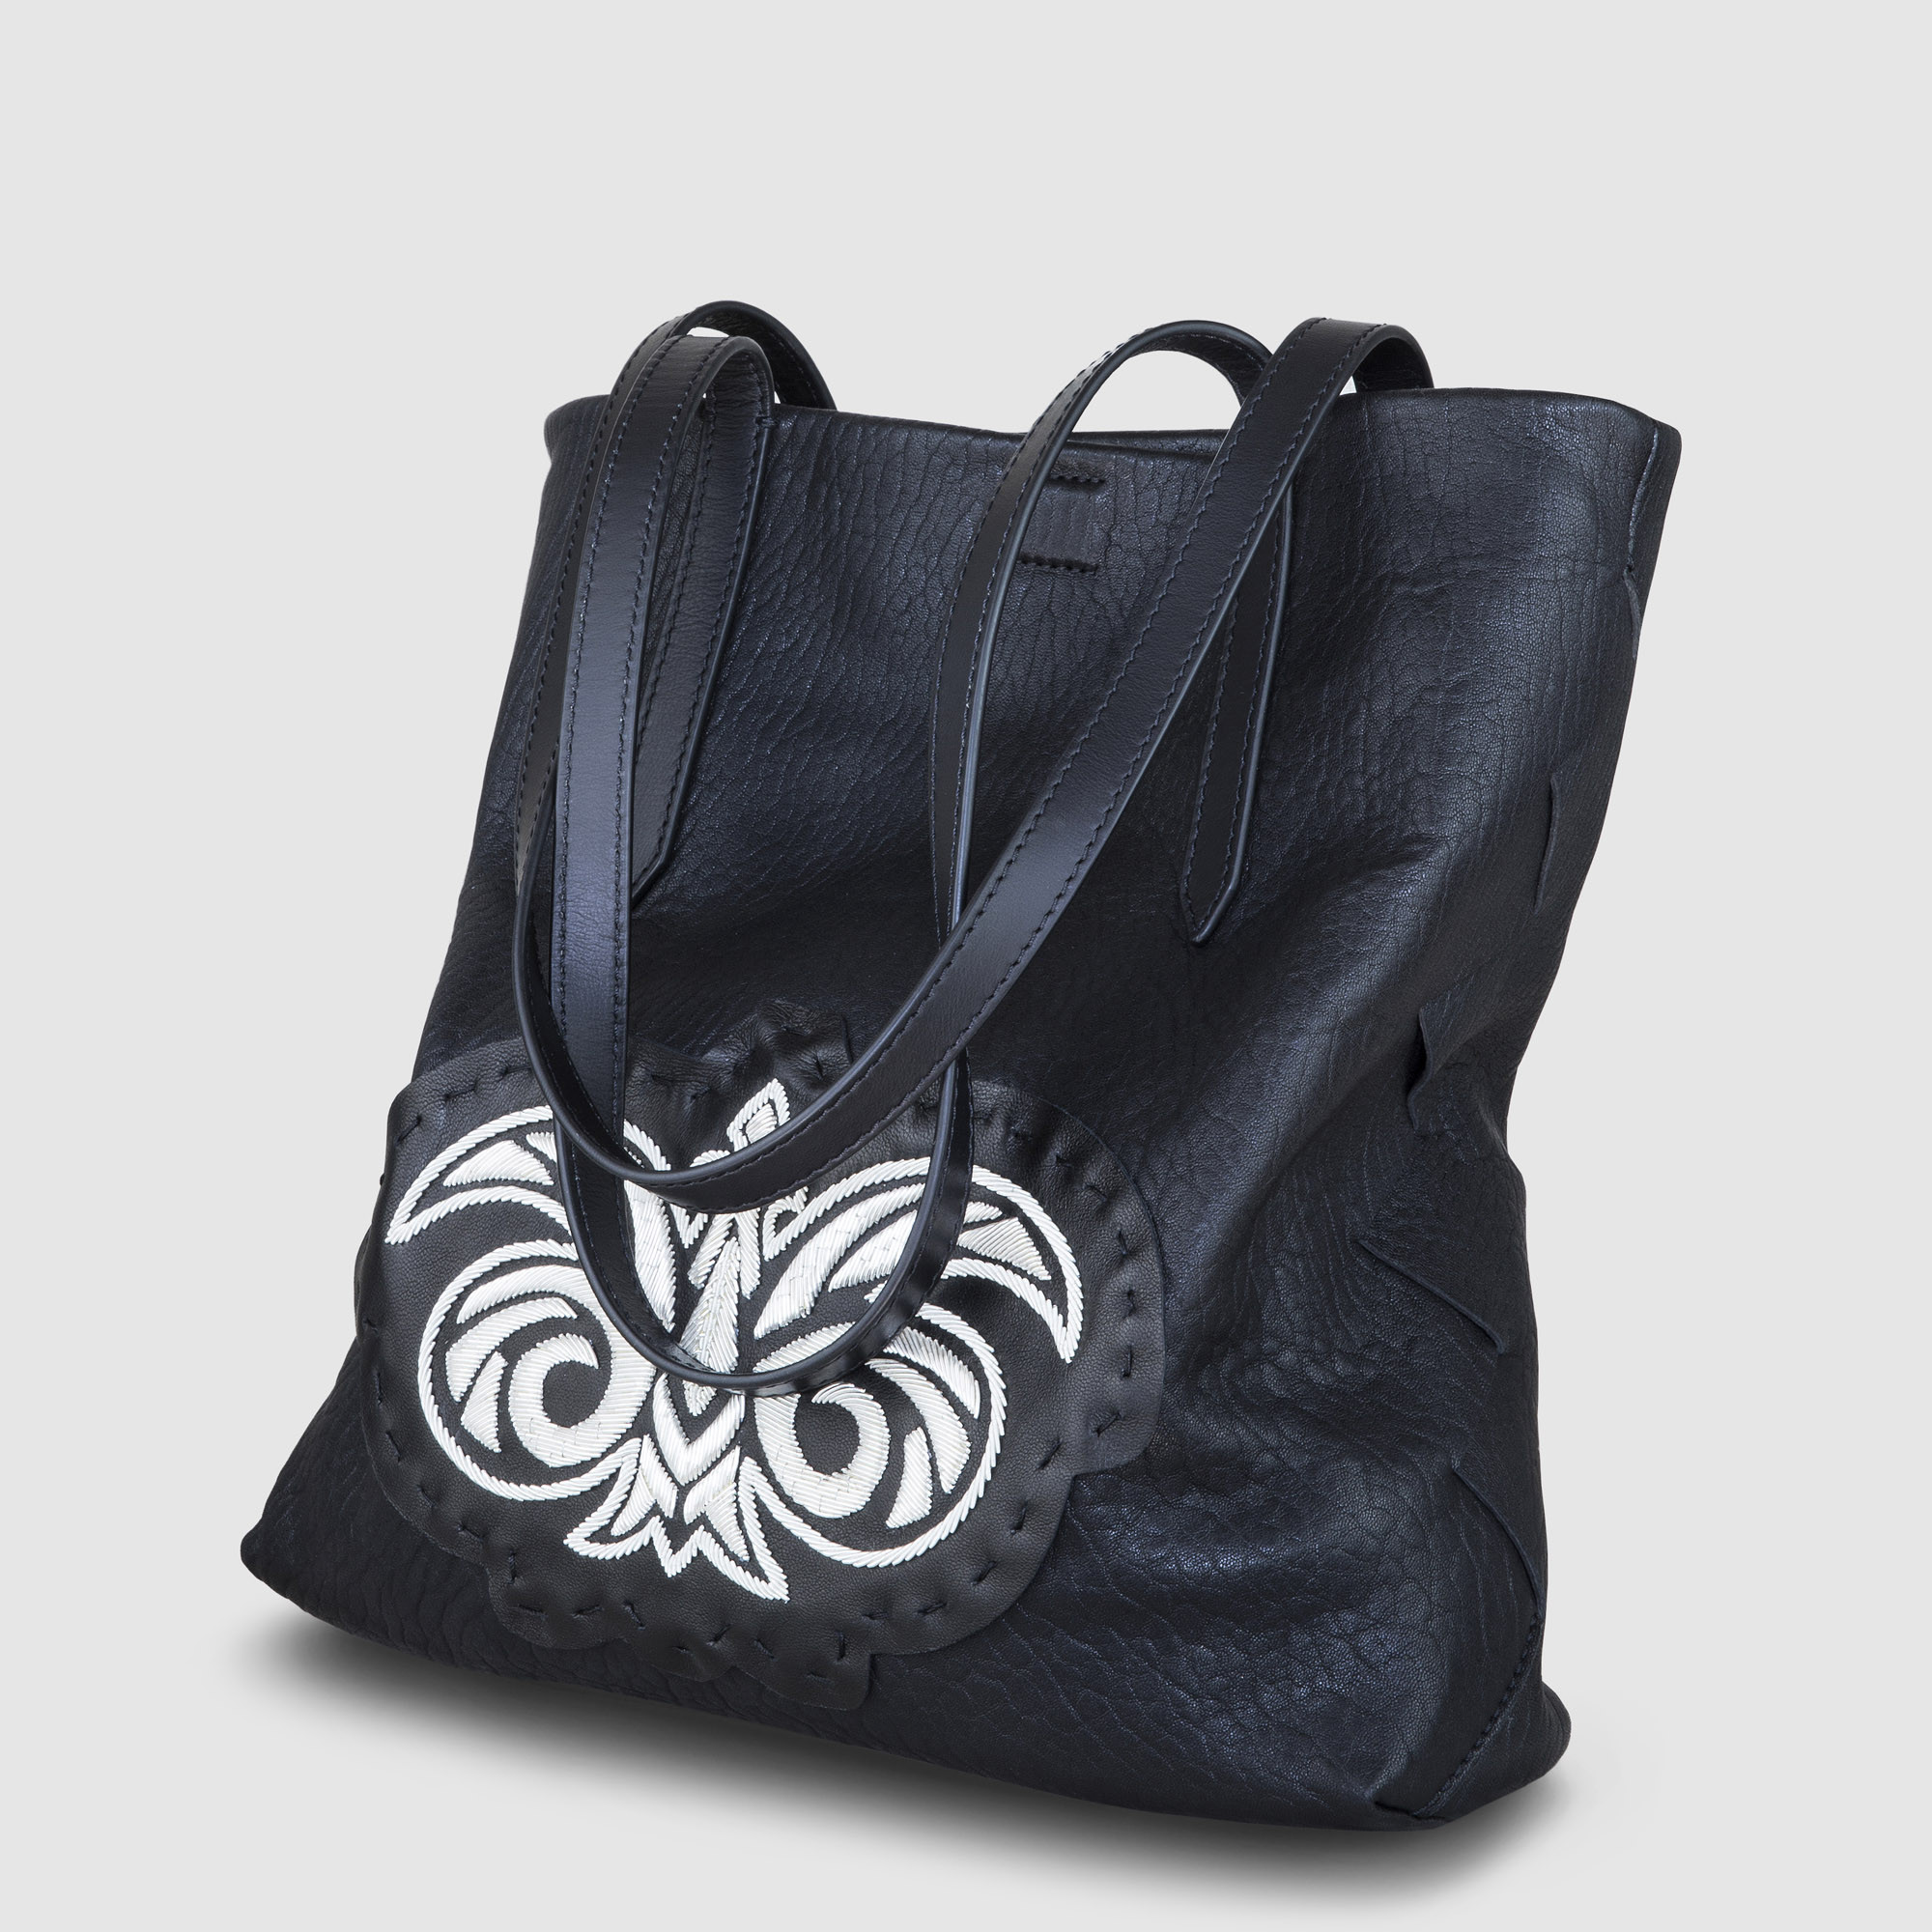 Soft lamb shopper "SUZANNE" M, black color embellished with silver cannetille - side view